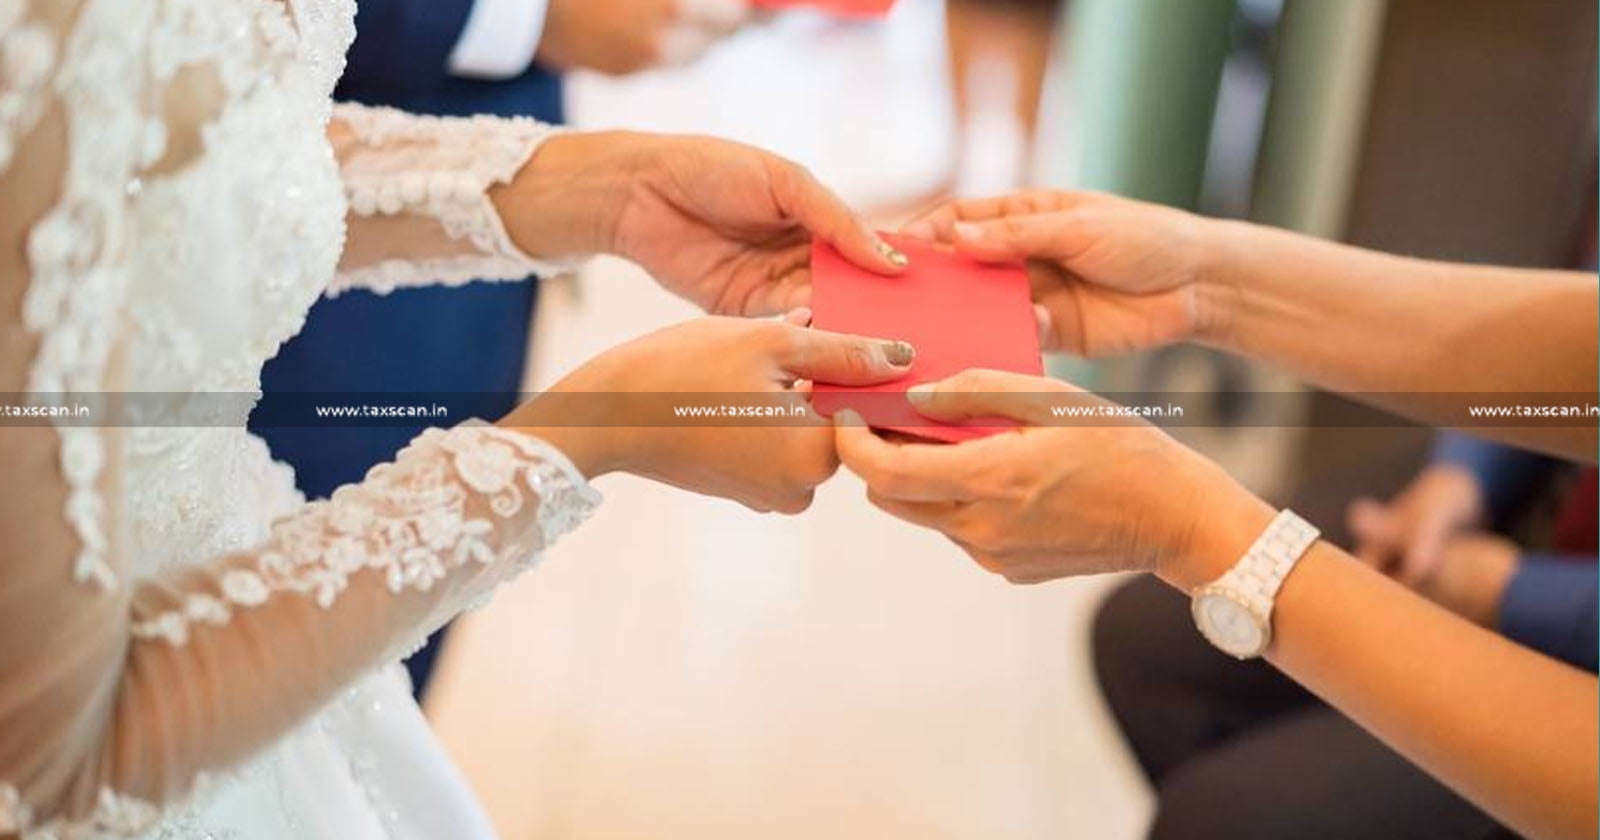 Cash Gifts - Cash Gifts during Marriage - ITAT - Marriage Gift - taxscan - taxnews